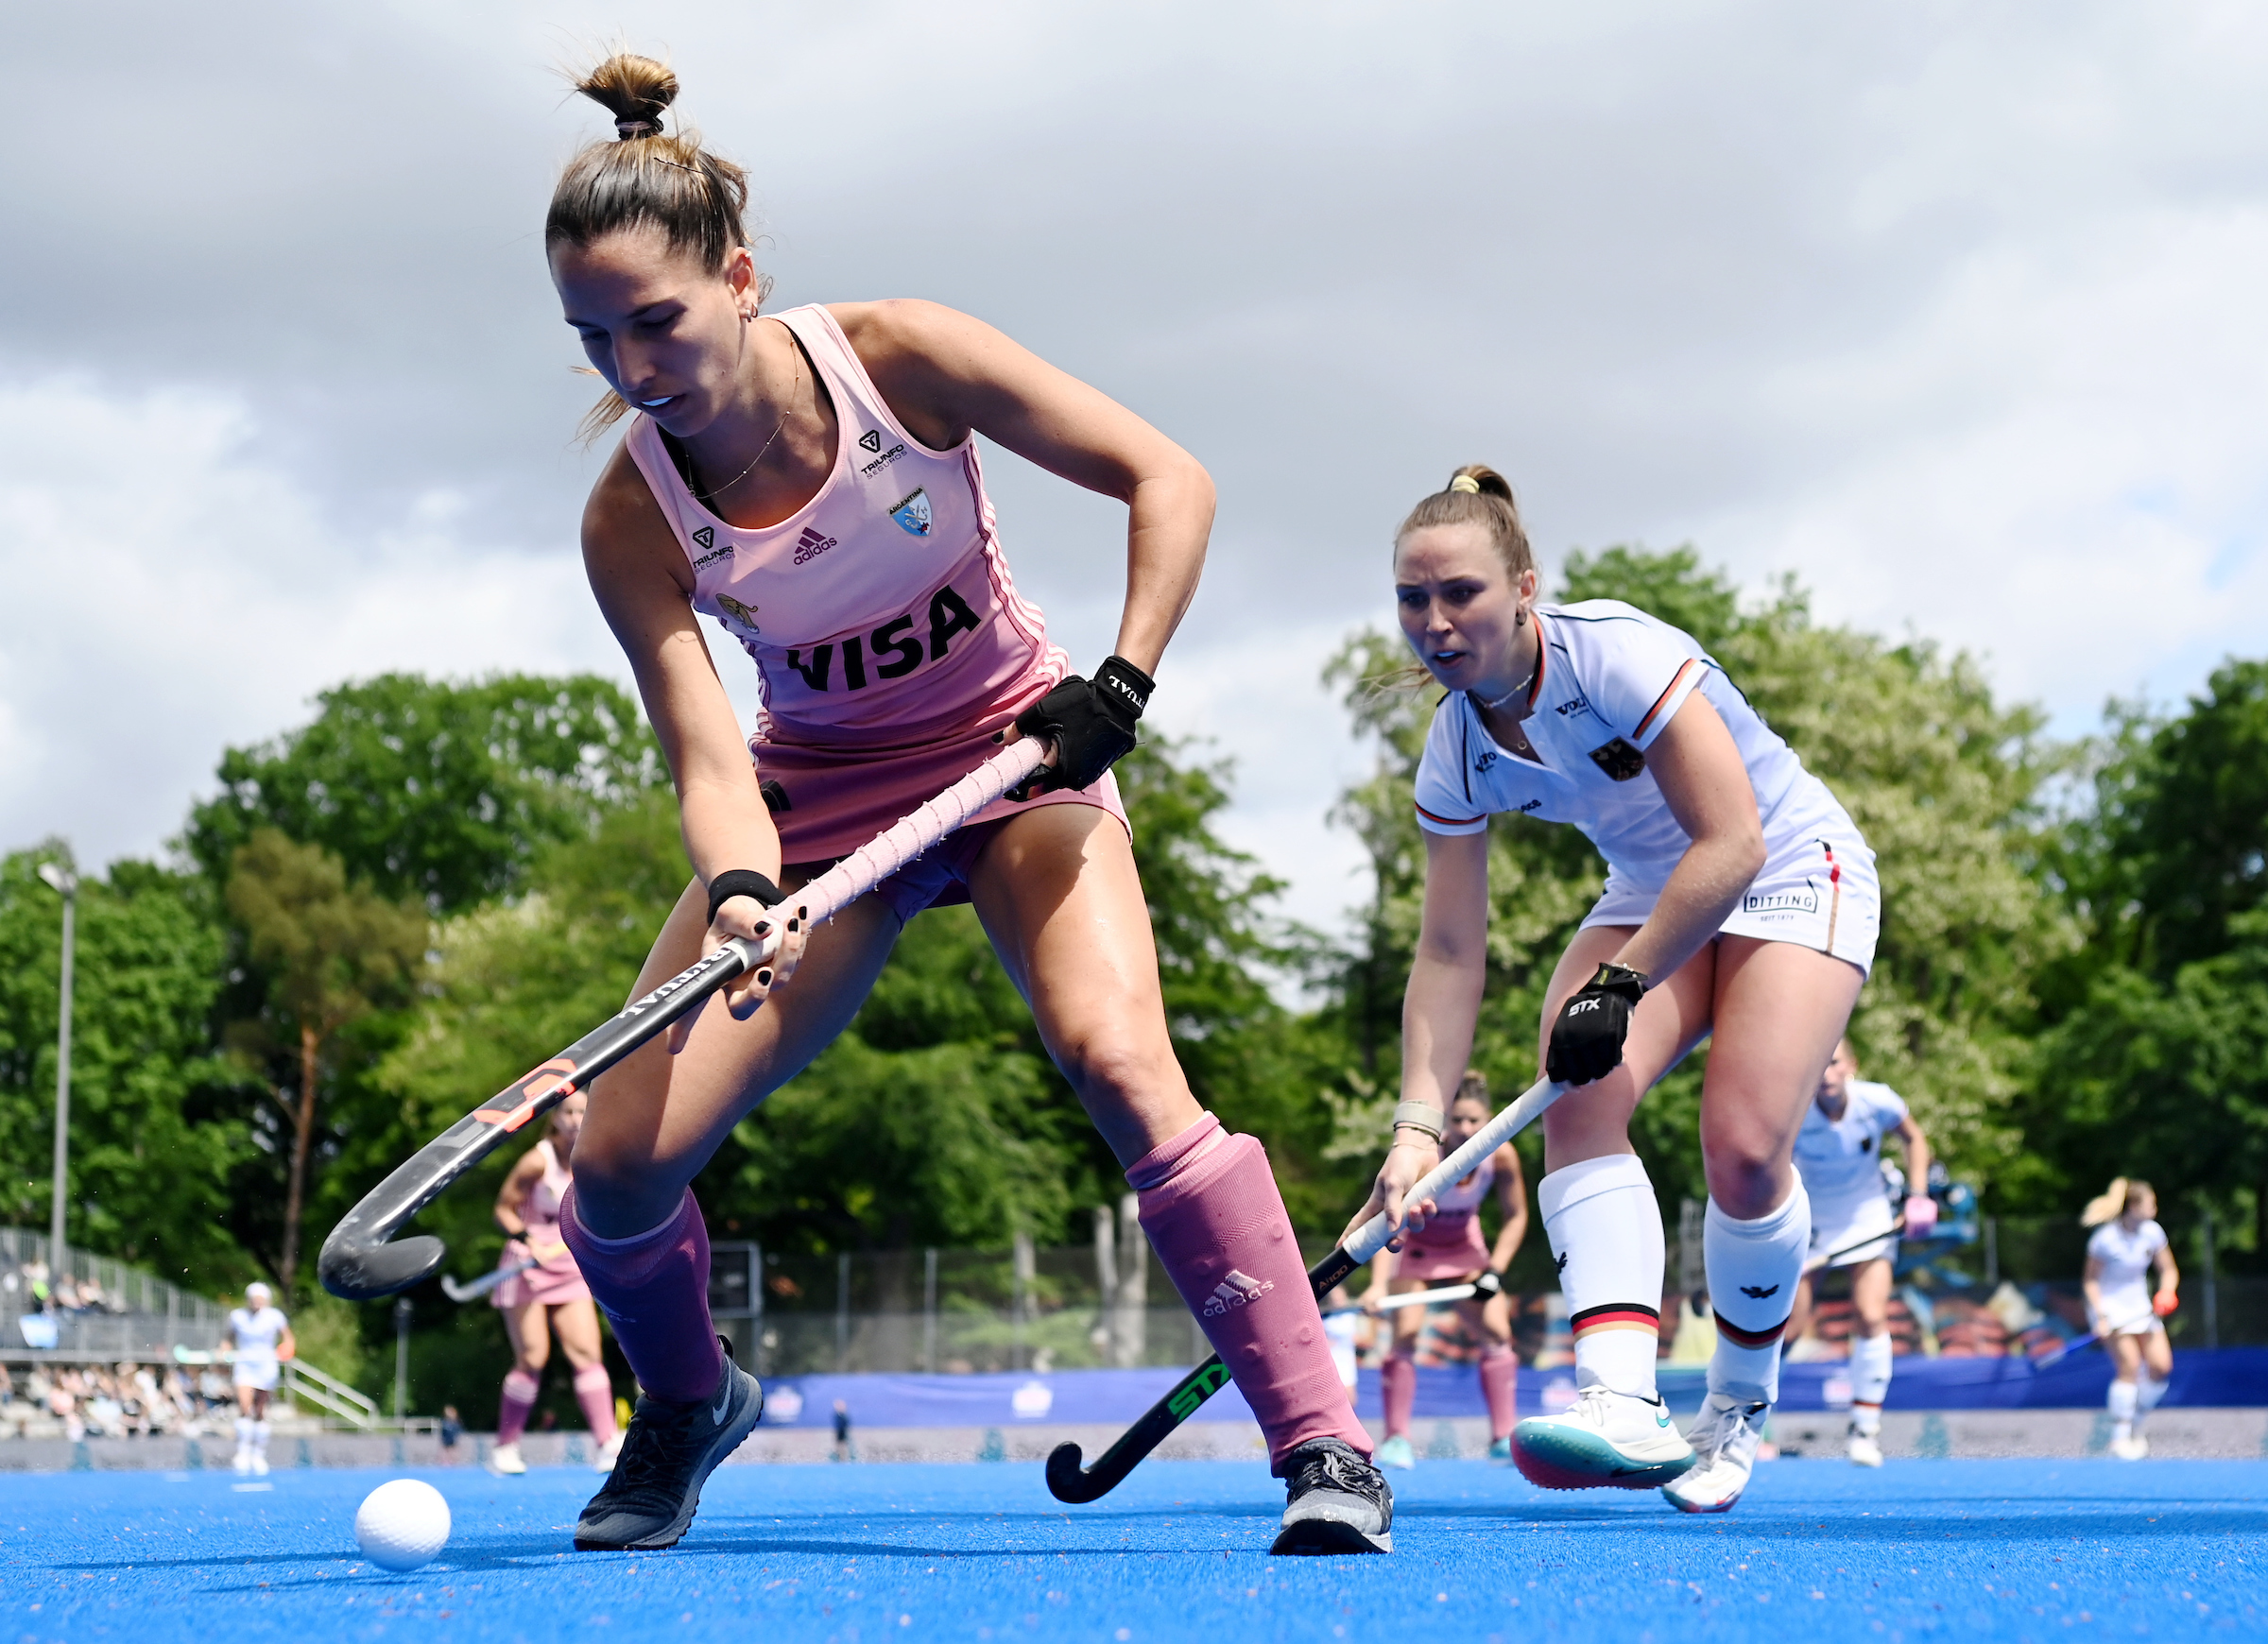 WSP 2205221734 - Pro-League: Leaders Argentina Beat the Danas Again - In the FIH Proleague on May 22, 2022 in Berlin, the Danas met Argentina for the second time in 48 hours. After national coach Valentin Altenburg's team narrowly lost 2-1 to the South Americans the day before, Germany had to admit defeat in the second game, 3-1. Nike Lorenz scored the goal for Germany. Maria Granatto scored twice for Argentina and Jimena Cedres once.